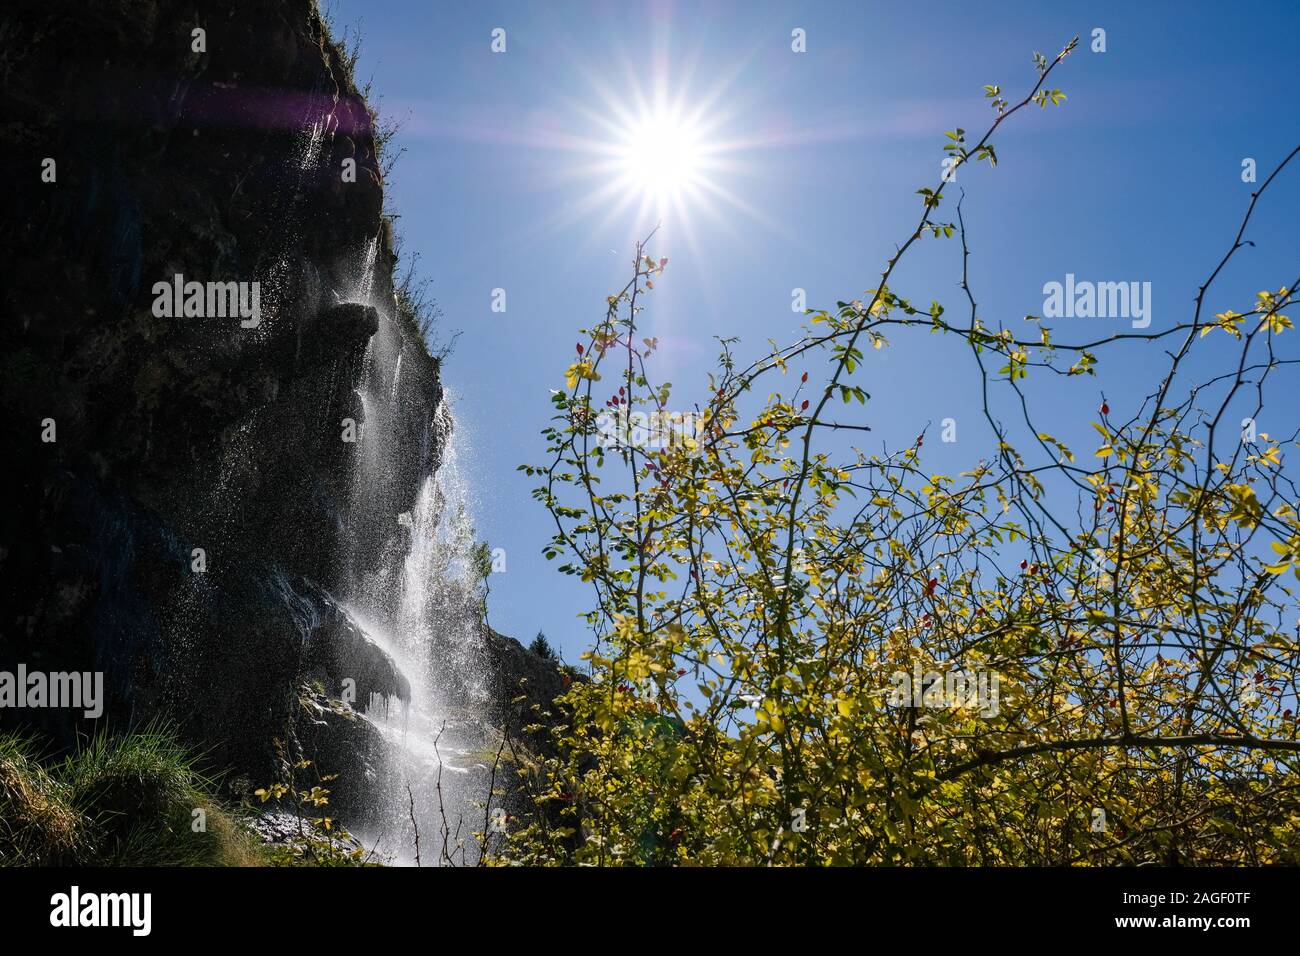 Tragacete, Spain. 04th Oct, 2019. A waterfall in the Serrania de Cuenca Natural Park with the river Jucar. Credit: Jens Kalaene/dpa-Zentralbild/ZB/dpa/Alamy Live News Stock Photo